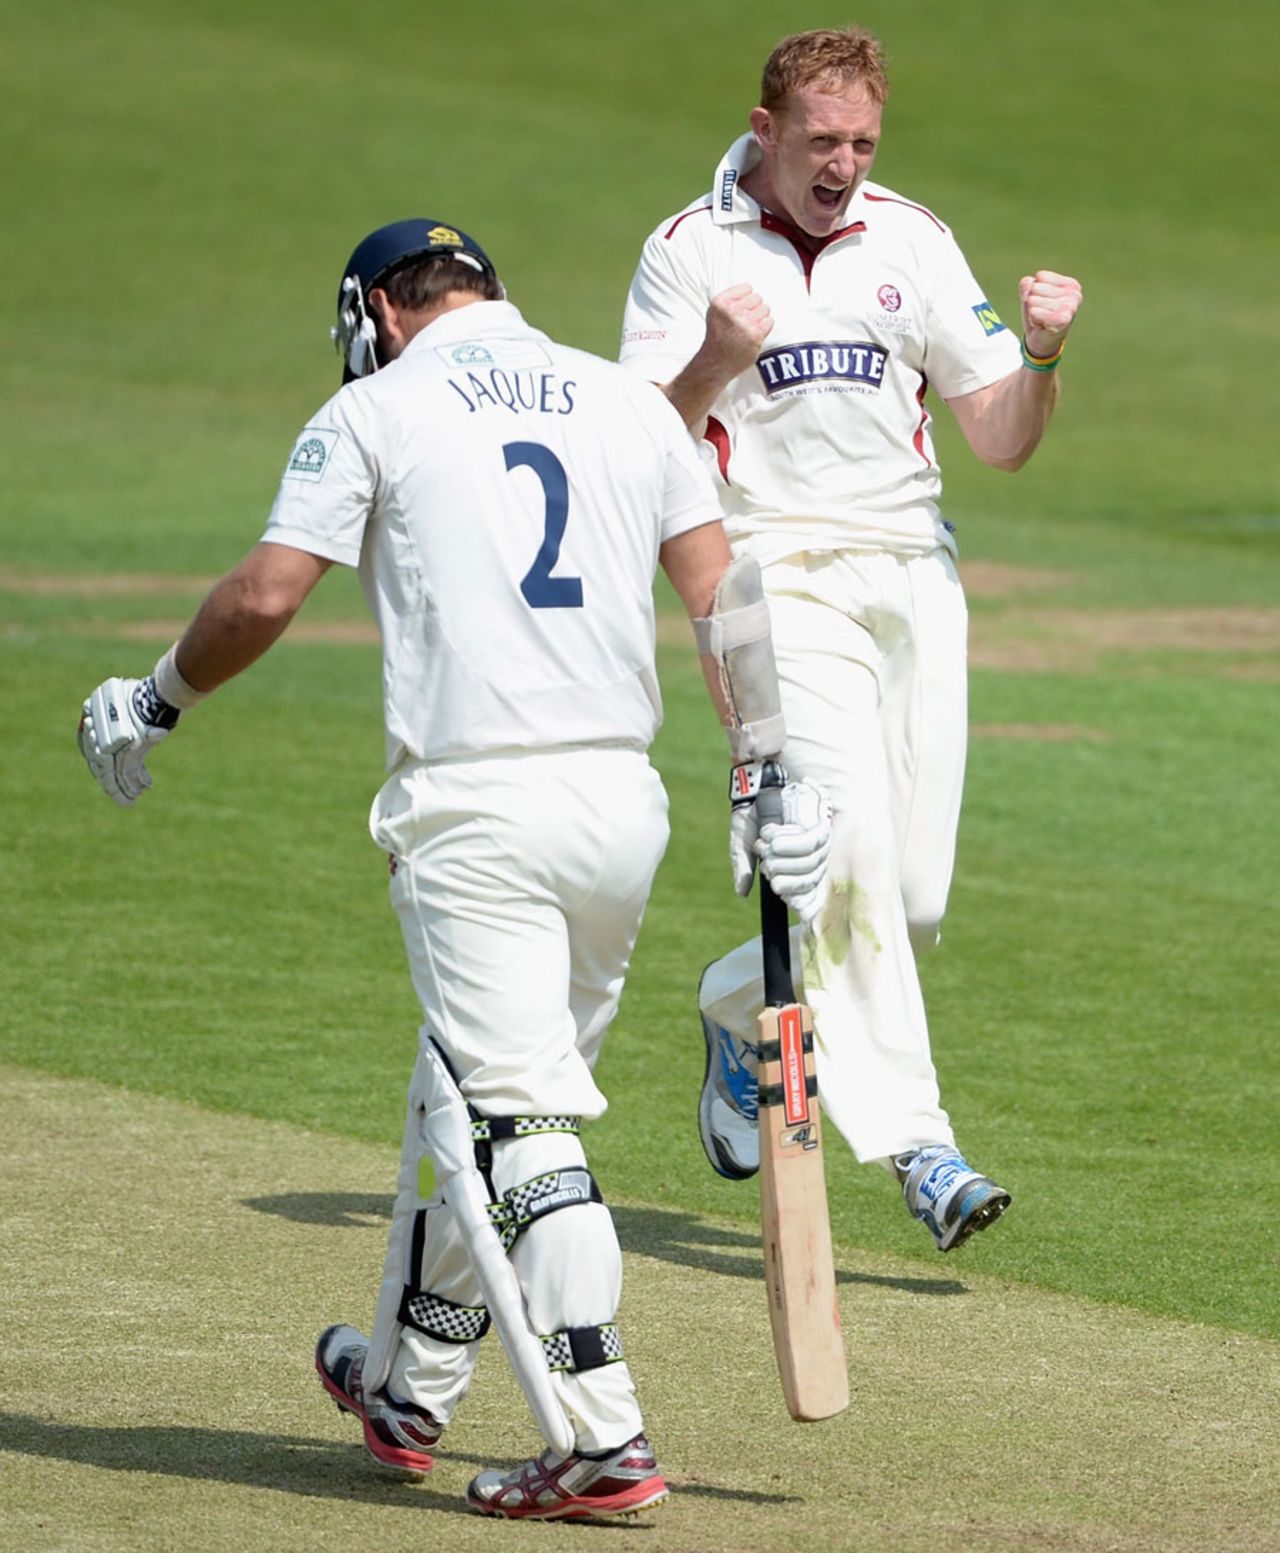 Steve Kirby dismissed Phil Jaques just before lunch, Yorkshire v Somerset, County Championship, Division One, Headingley, 1st day, May 7, 2013